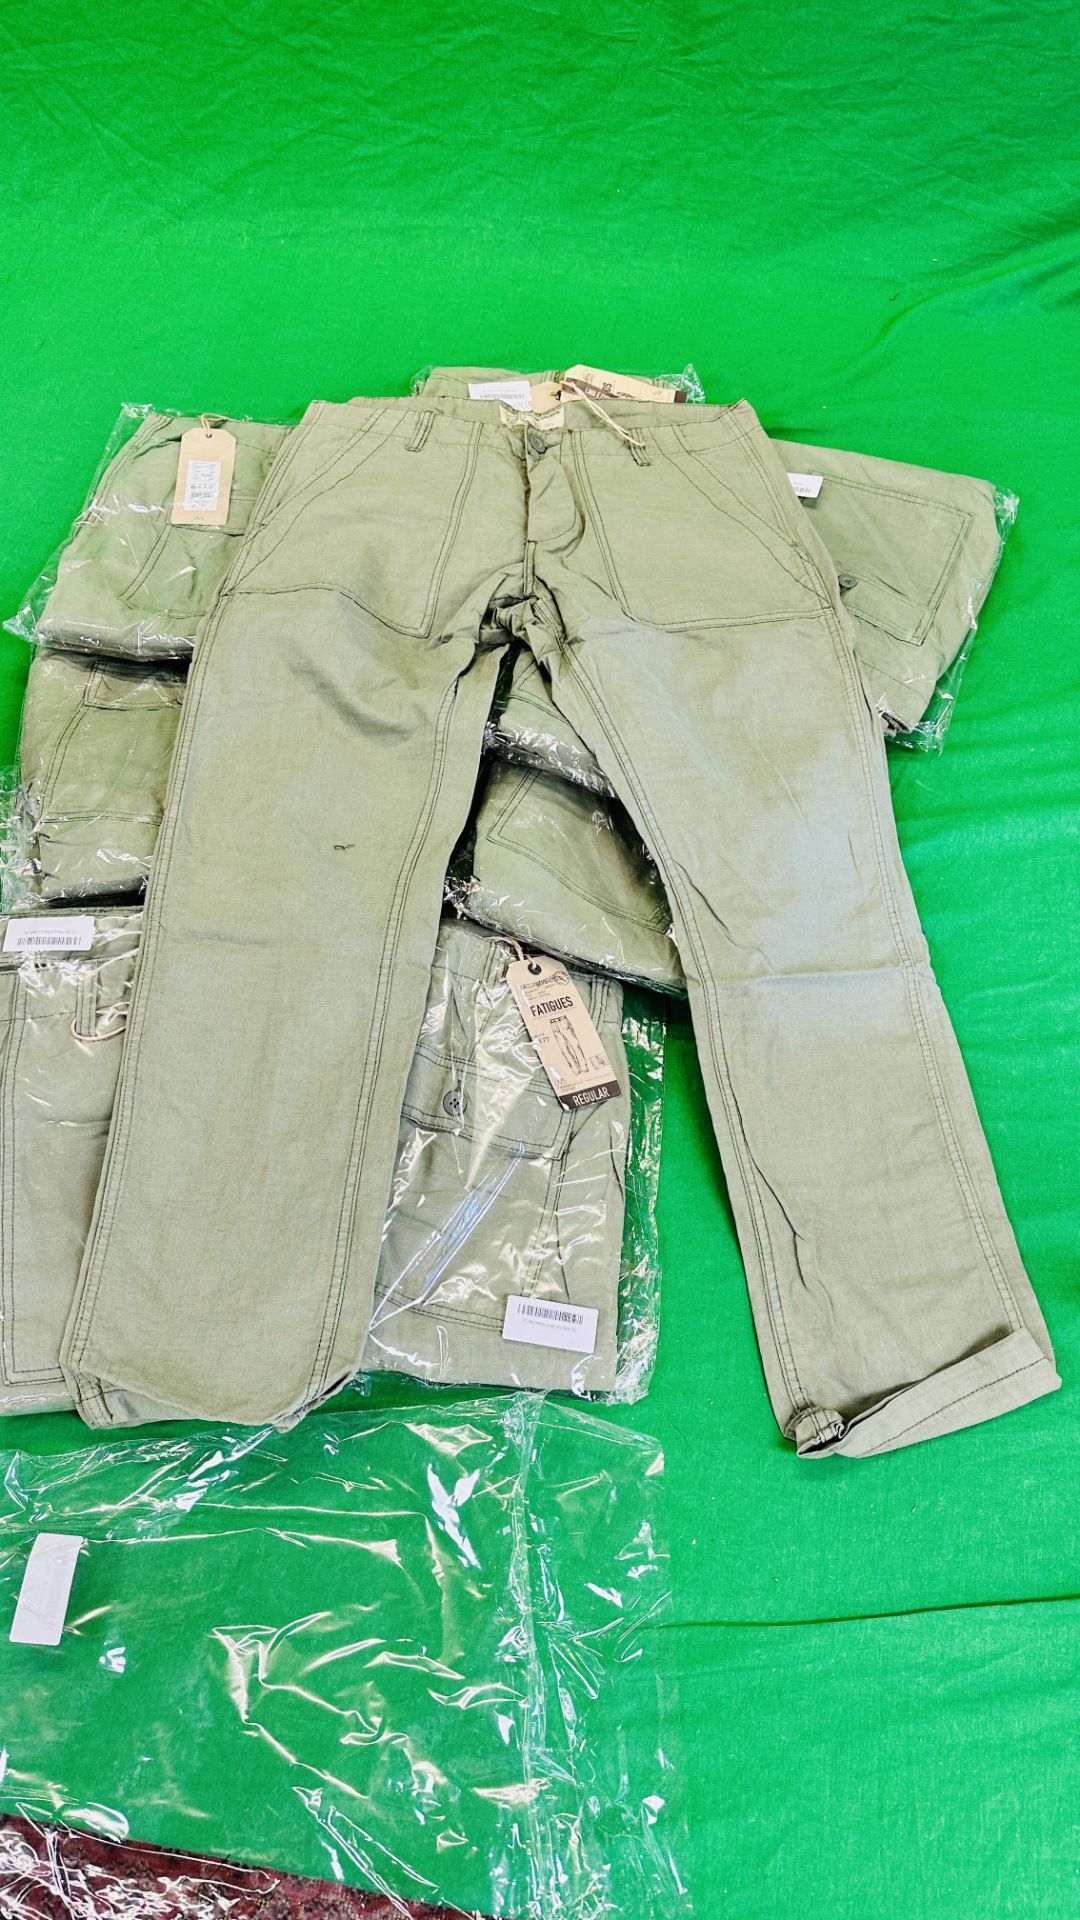 12 PAIRS OF OLIVE GREEN FATIGUES CHINO'S - VARIOUS SIZES 33" - 42" - Image 2 of 5